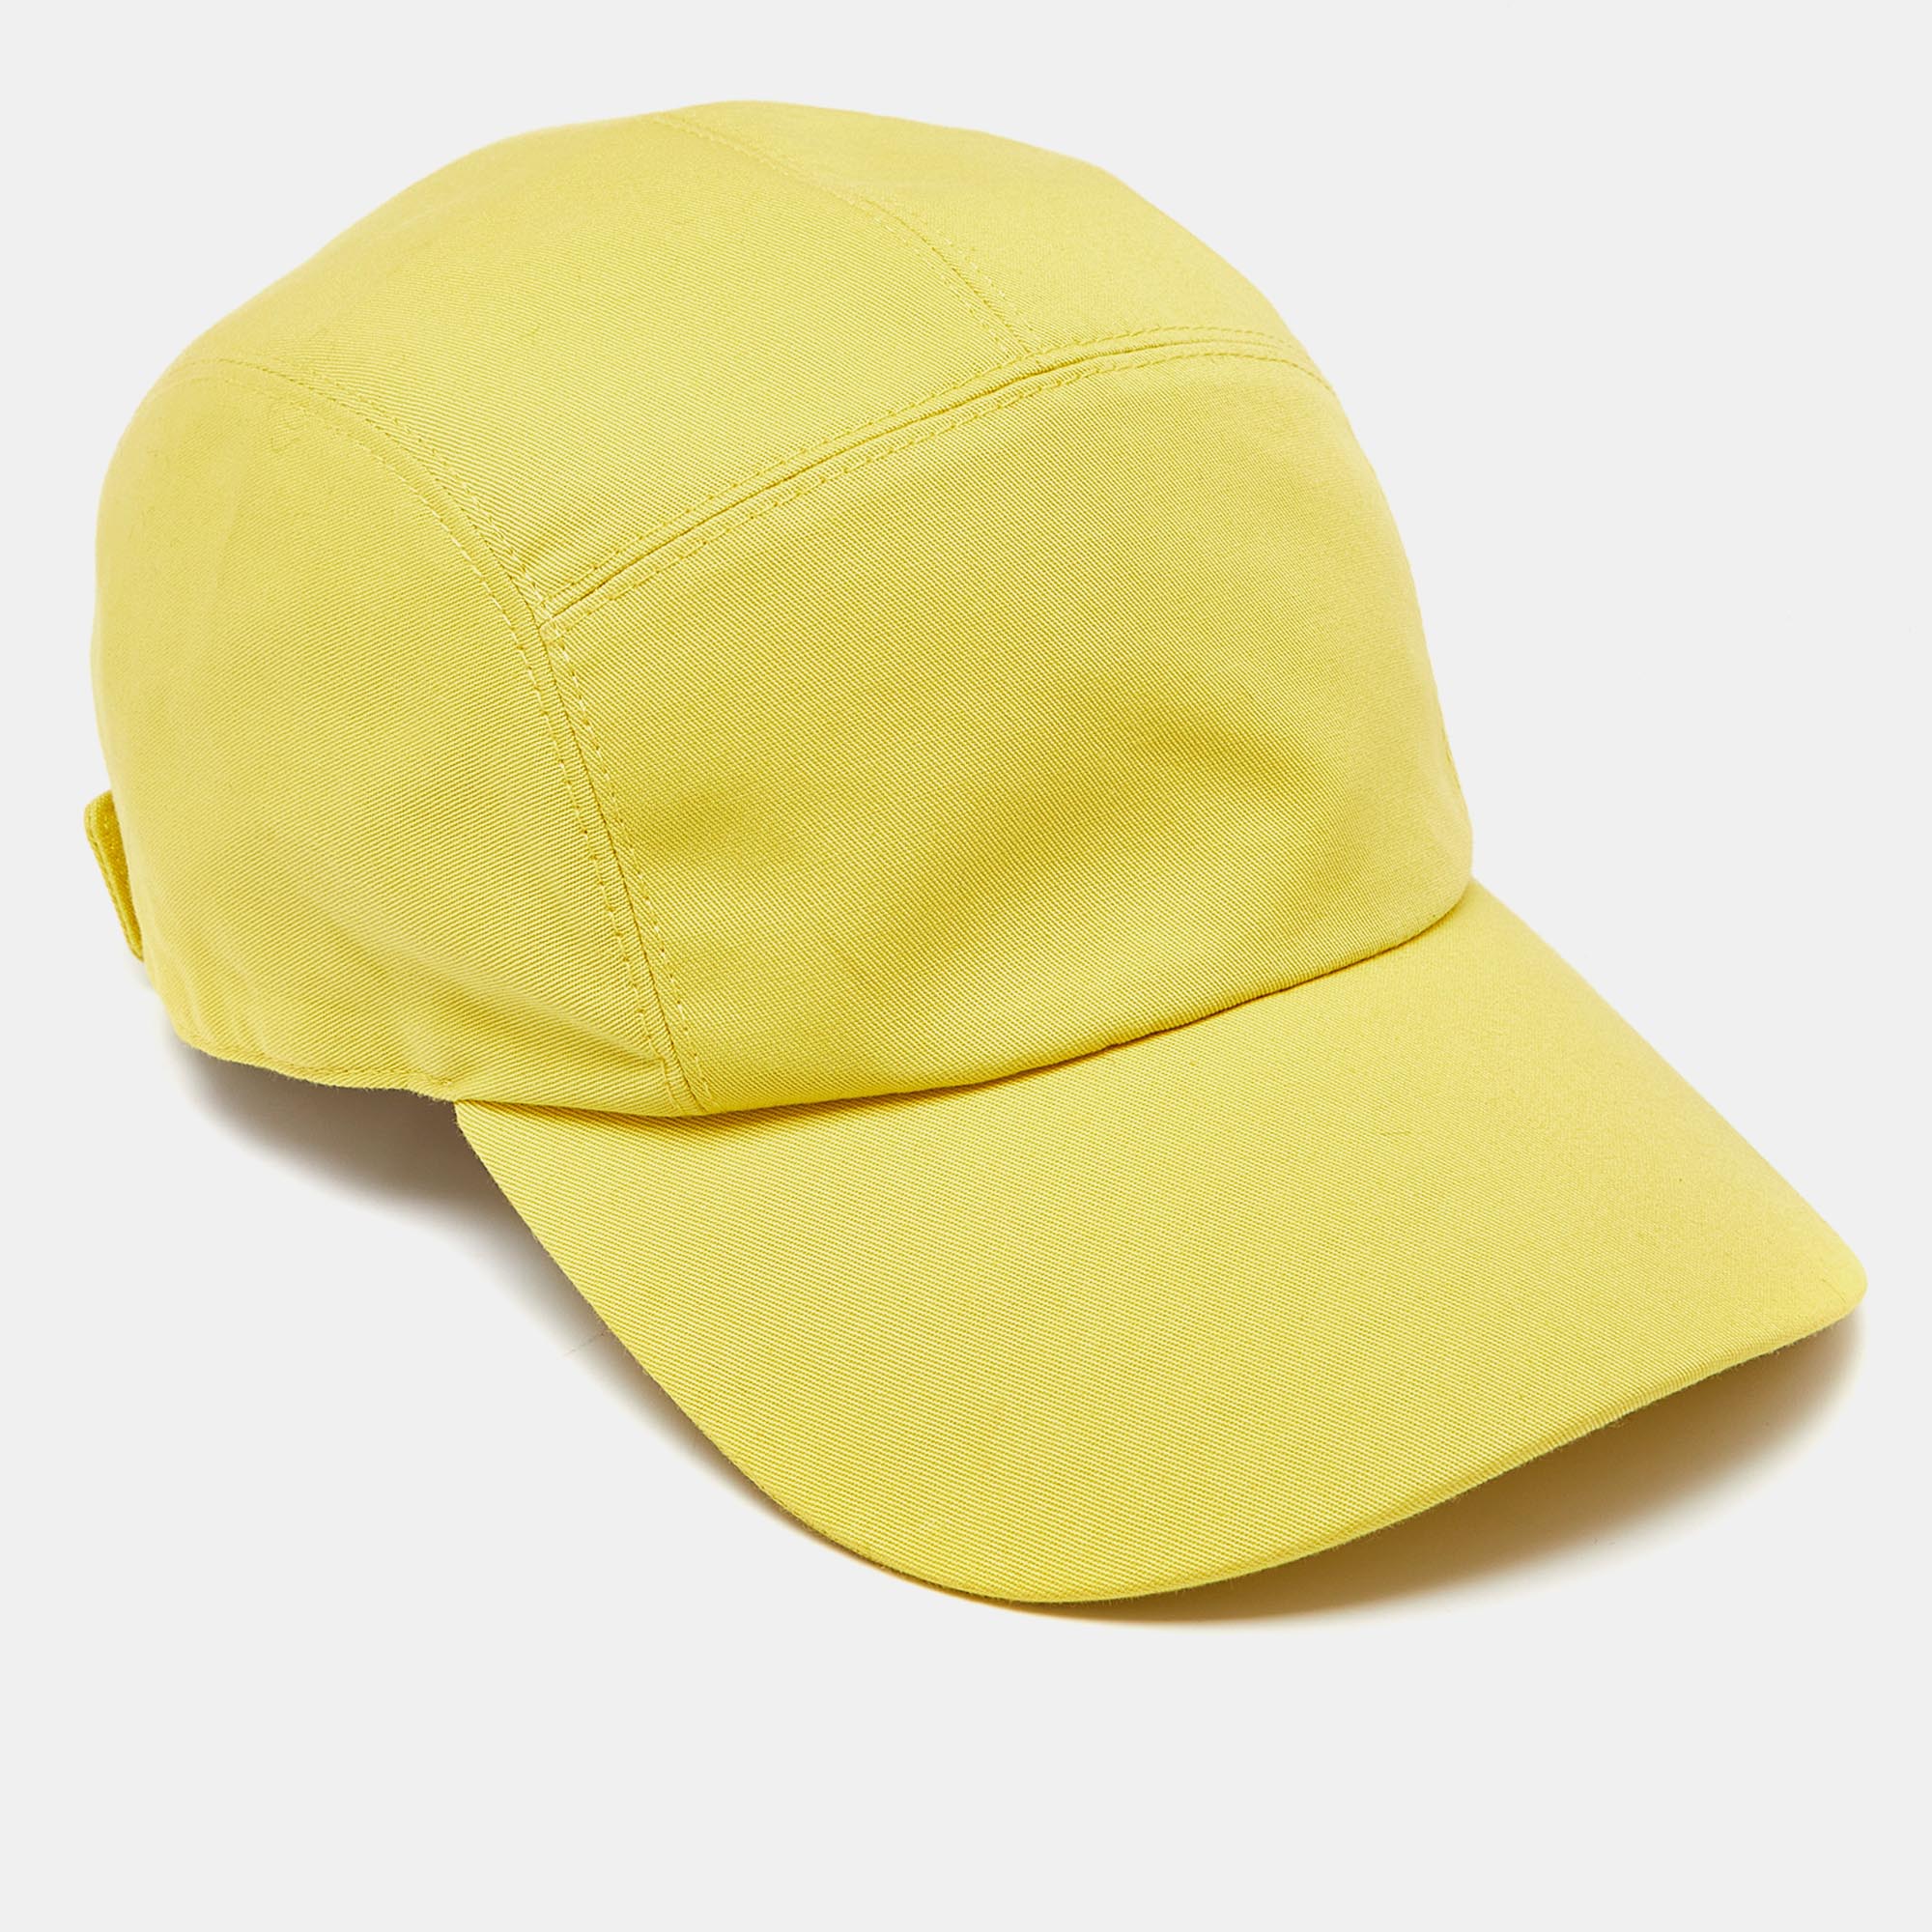 Hermes herm&egrave;s yellow h embroidered cotton cap size 59